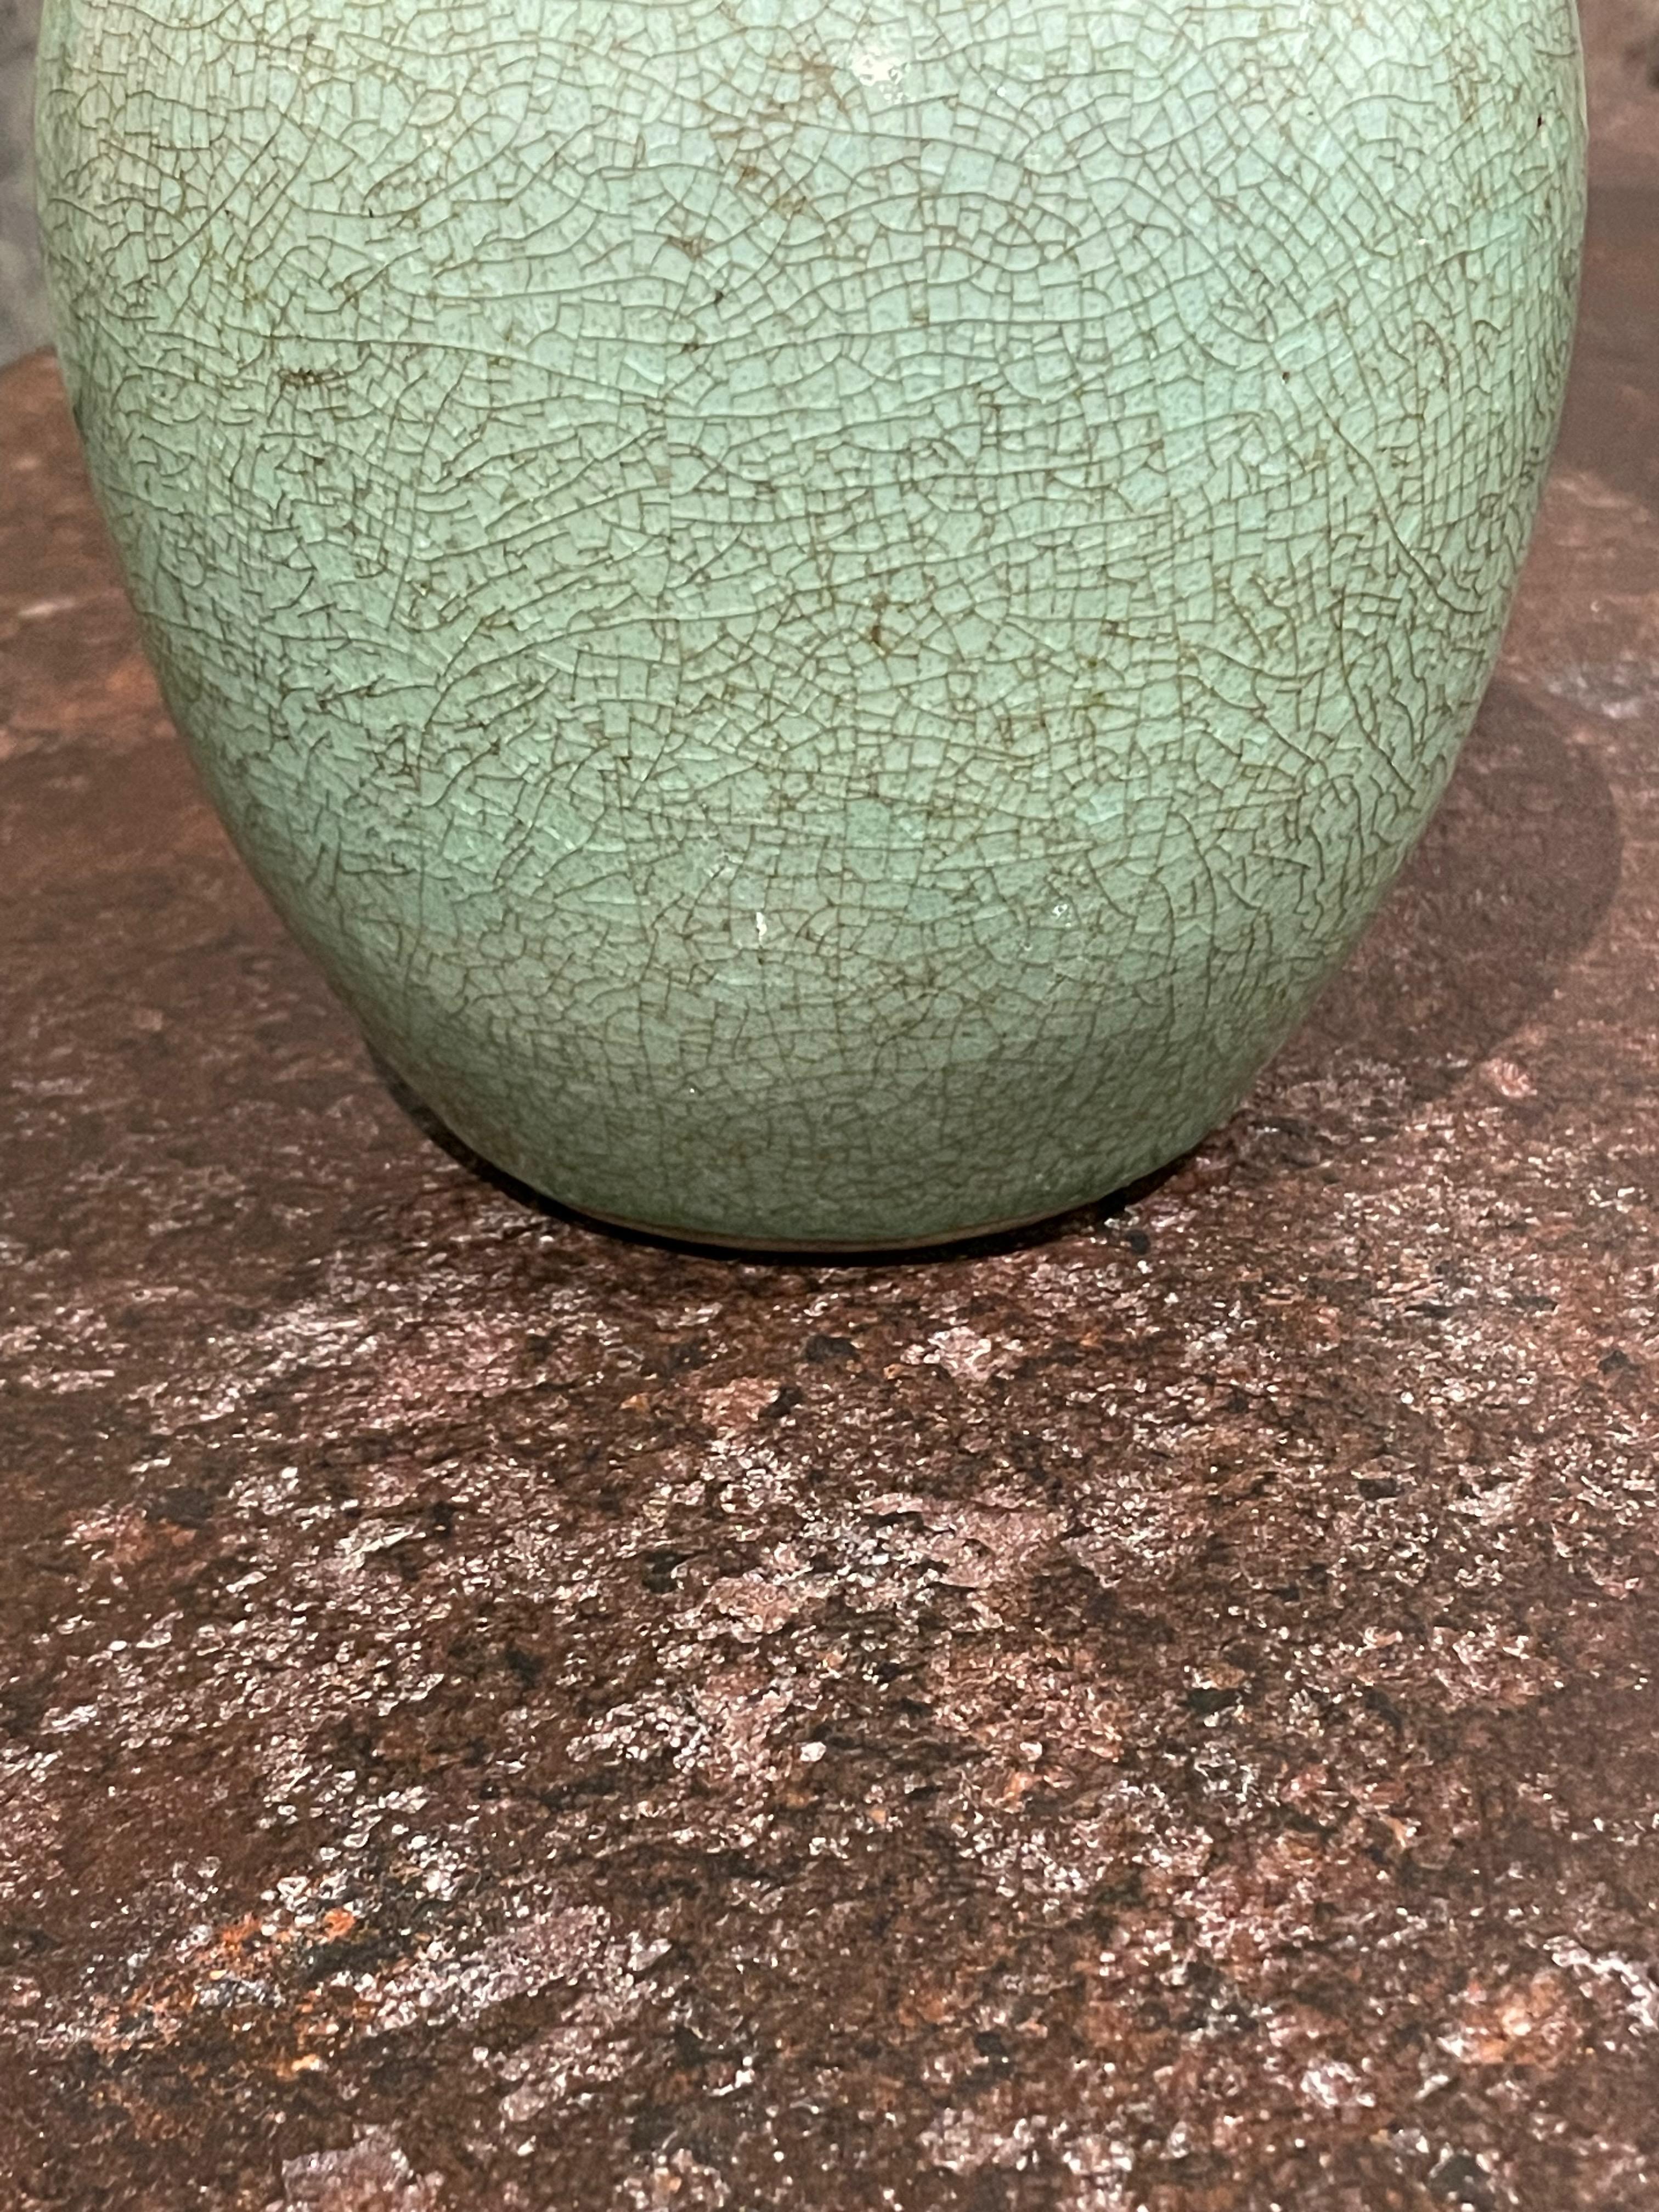 Contemporary Chinese small celadon crackle glaze vase.
Contrast tan band at opening.
The crackle glaze gives the vase the appearance of a vintage vase.